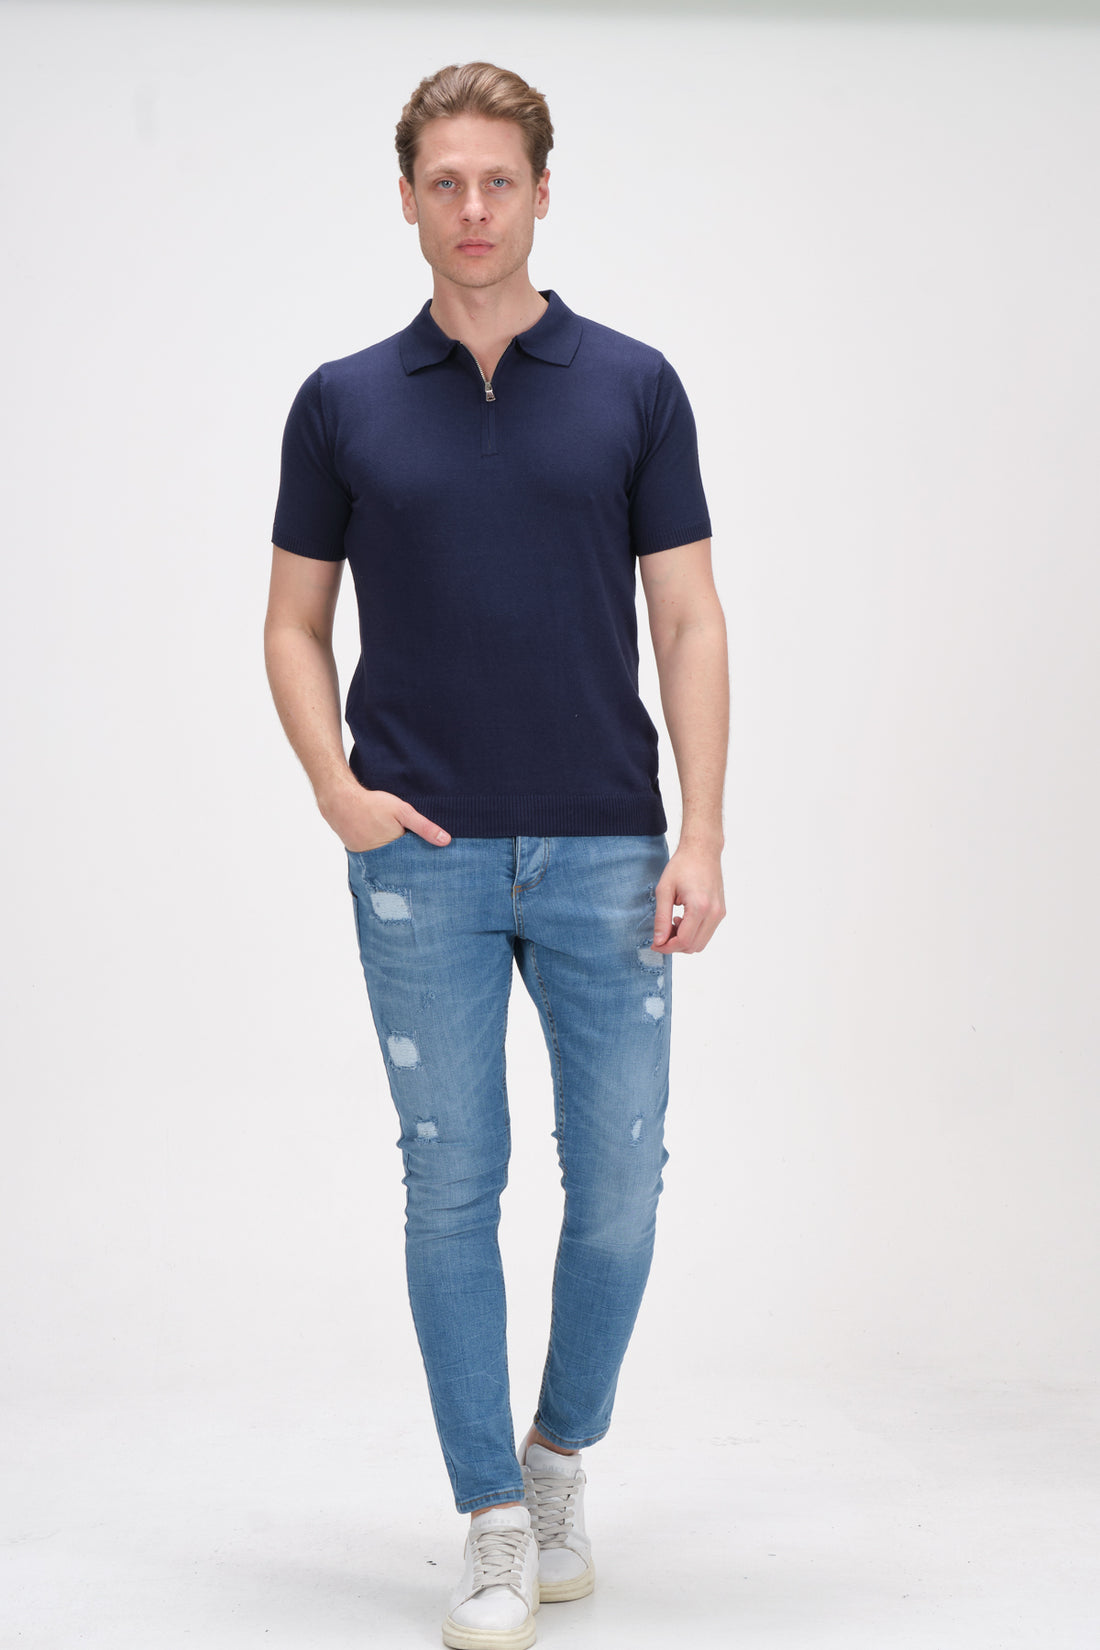 N° 6405 Zipper Knitted Polo Tee - Navy - Ron Tomson